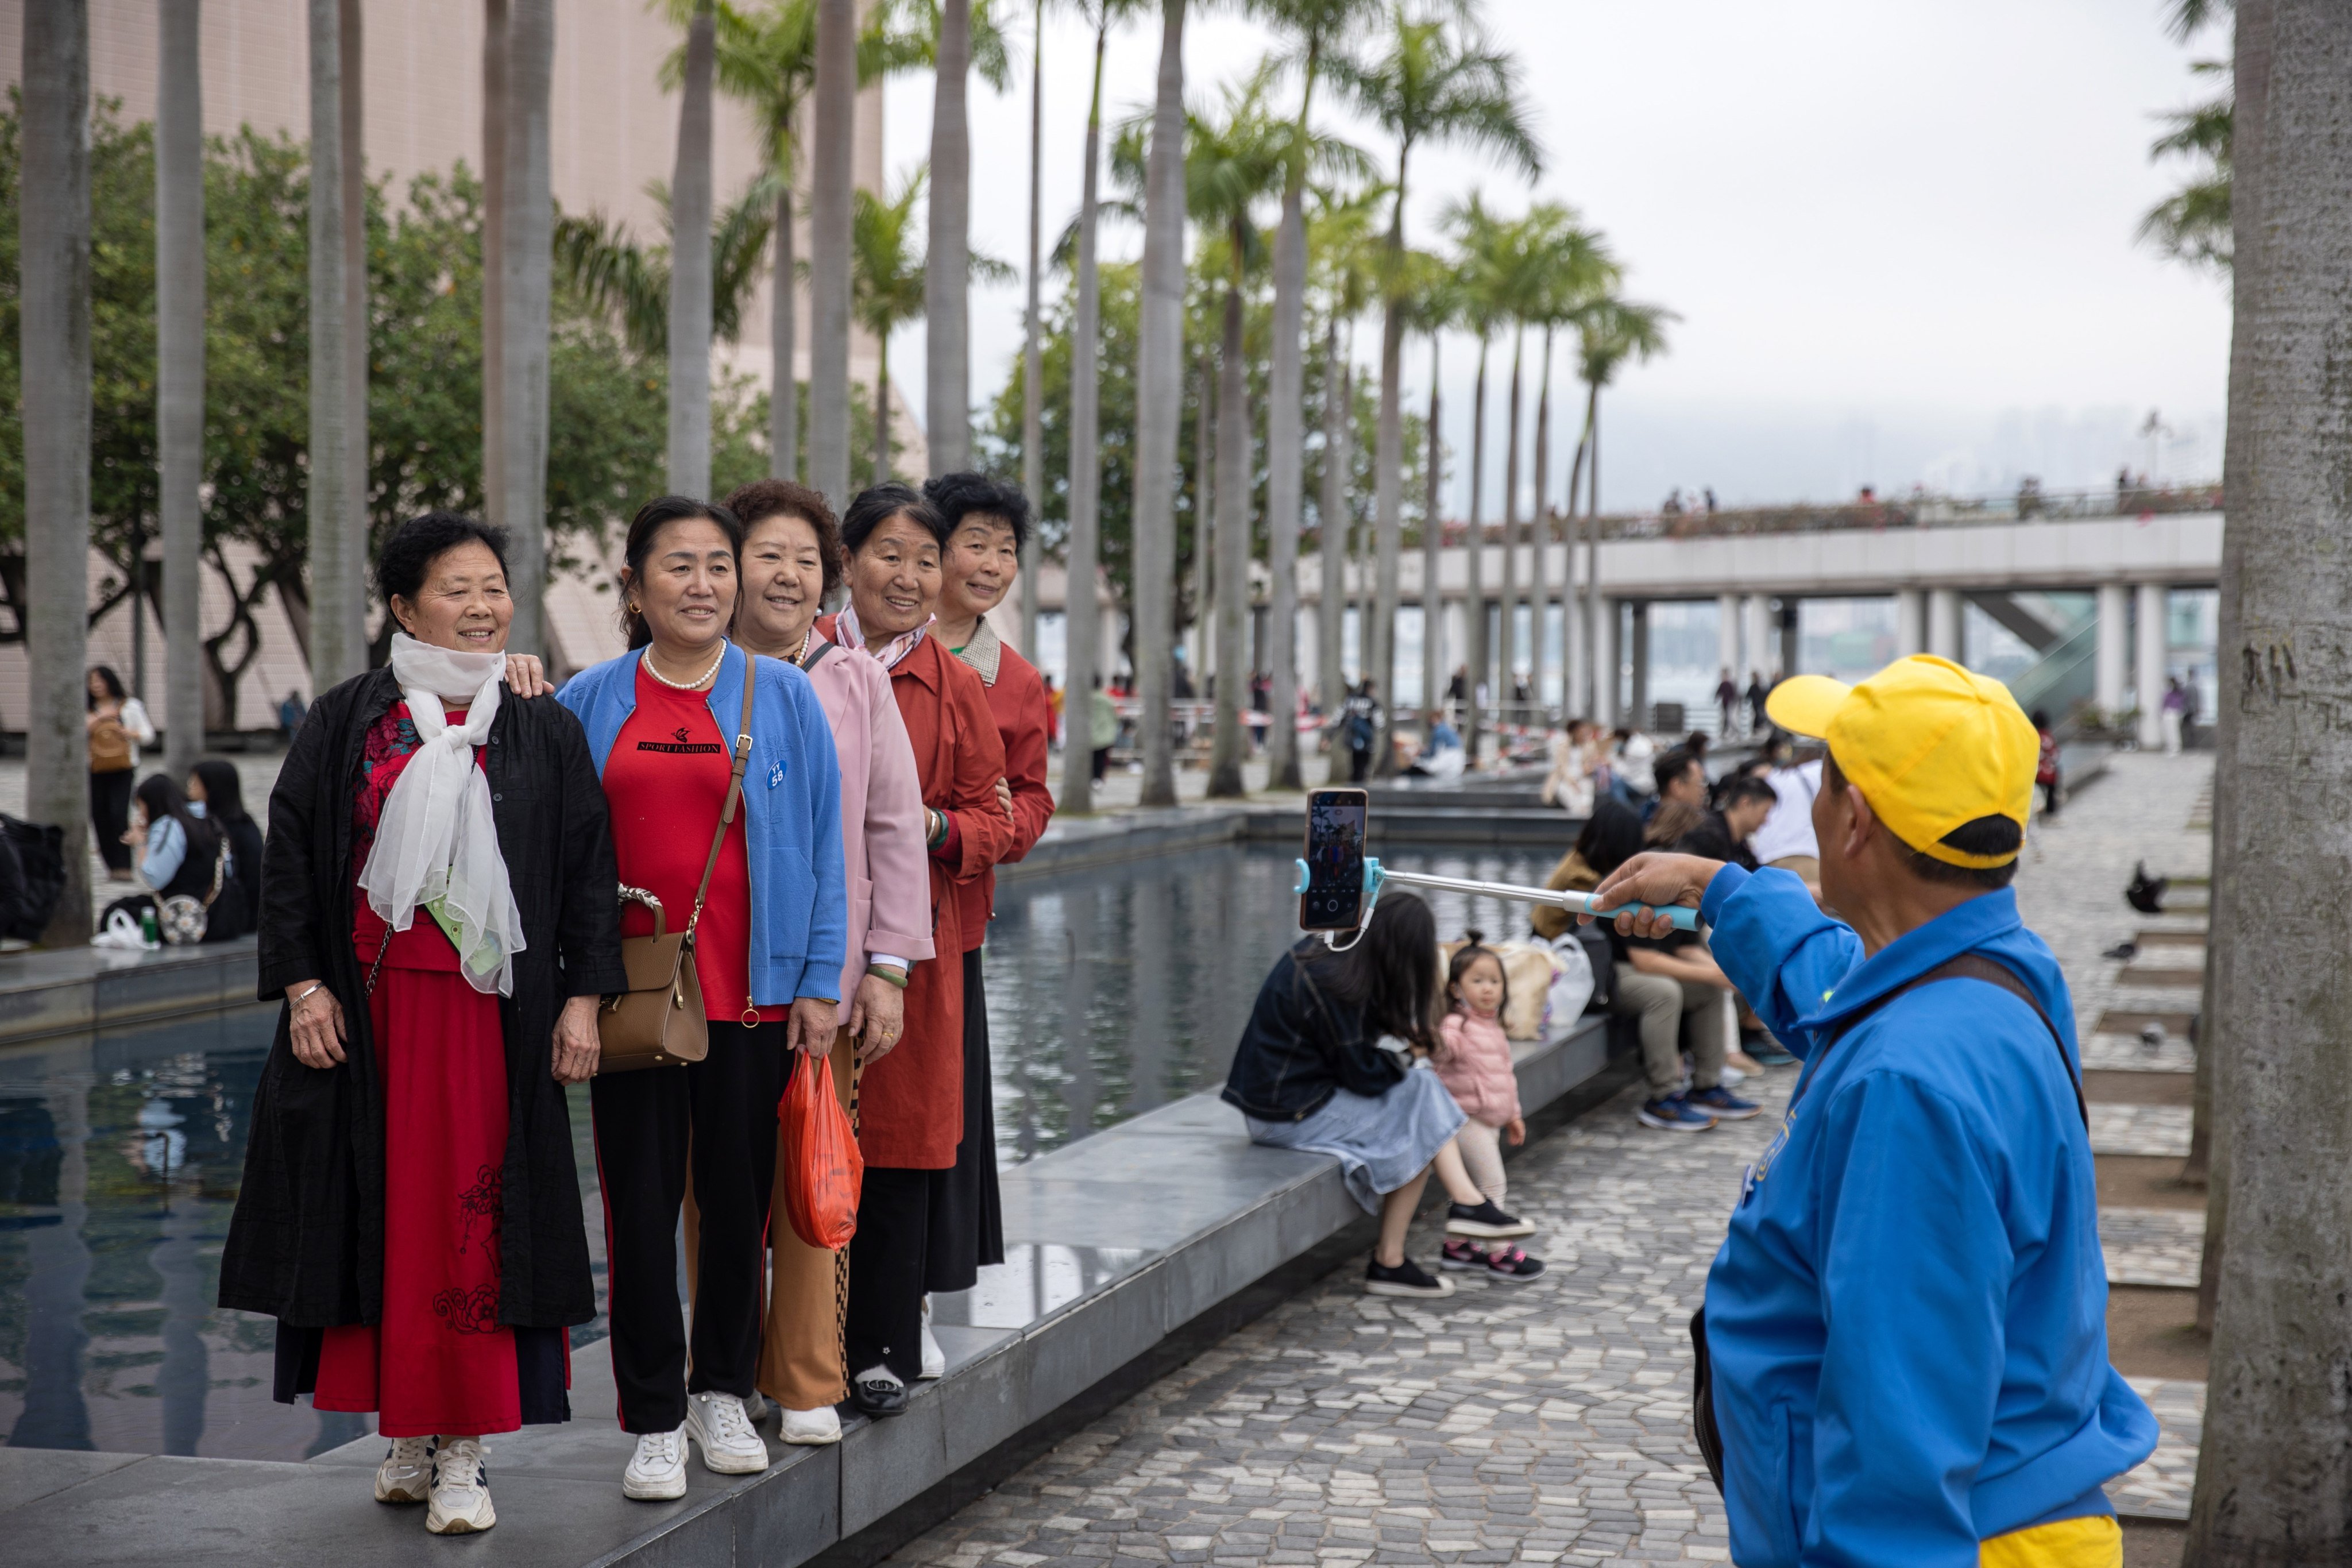 Mainland Chinese tourists, part of a tour group, pose for photos on the Tsim Sha Tsui waterfront in Hong Kong on March 30. Photo: EPA-EFE